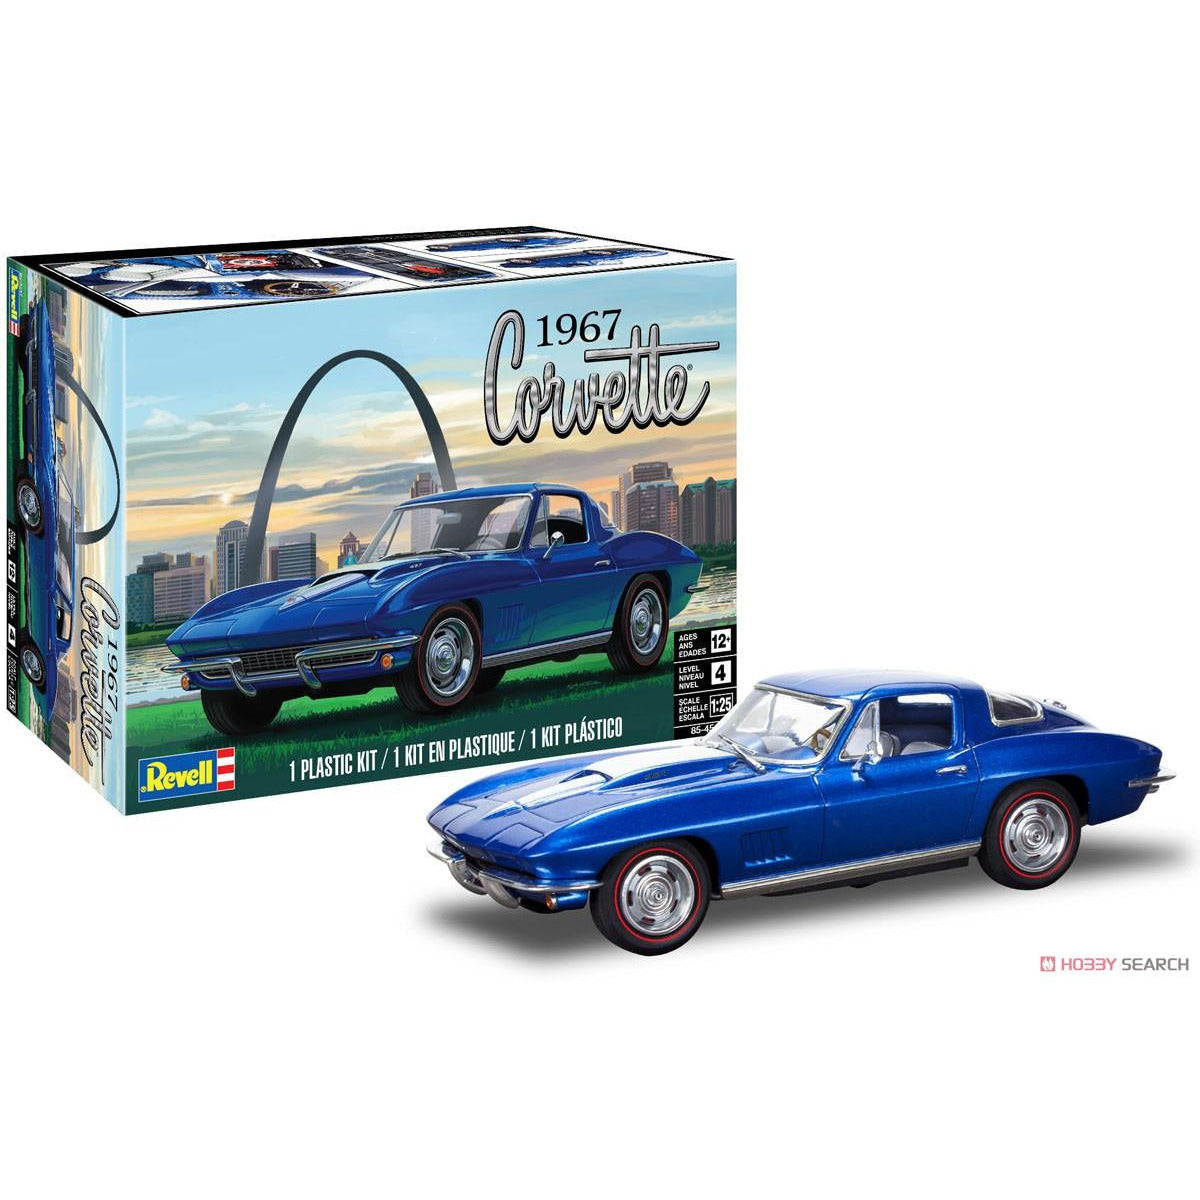 1967 Corvette Coupe 1/25 #4517 by Revell